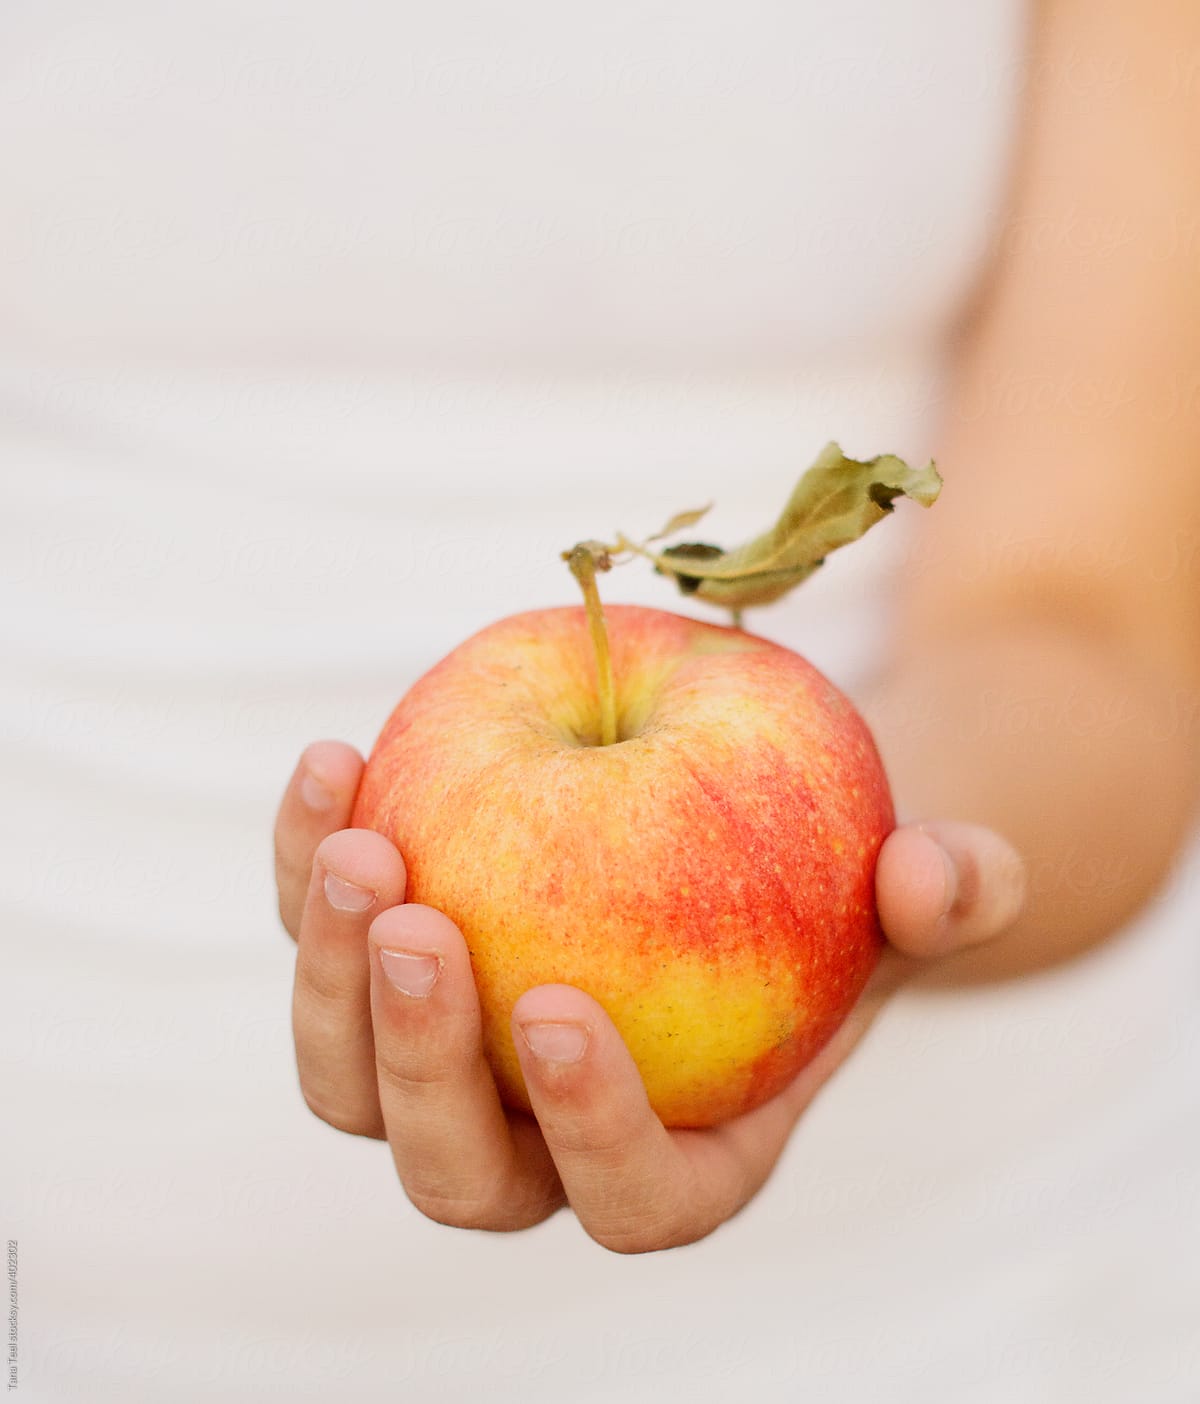 A freshly picked apple held in the palm of a hand